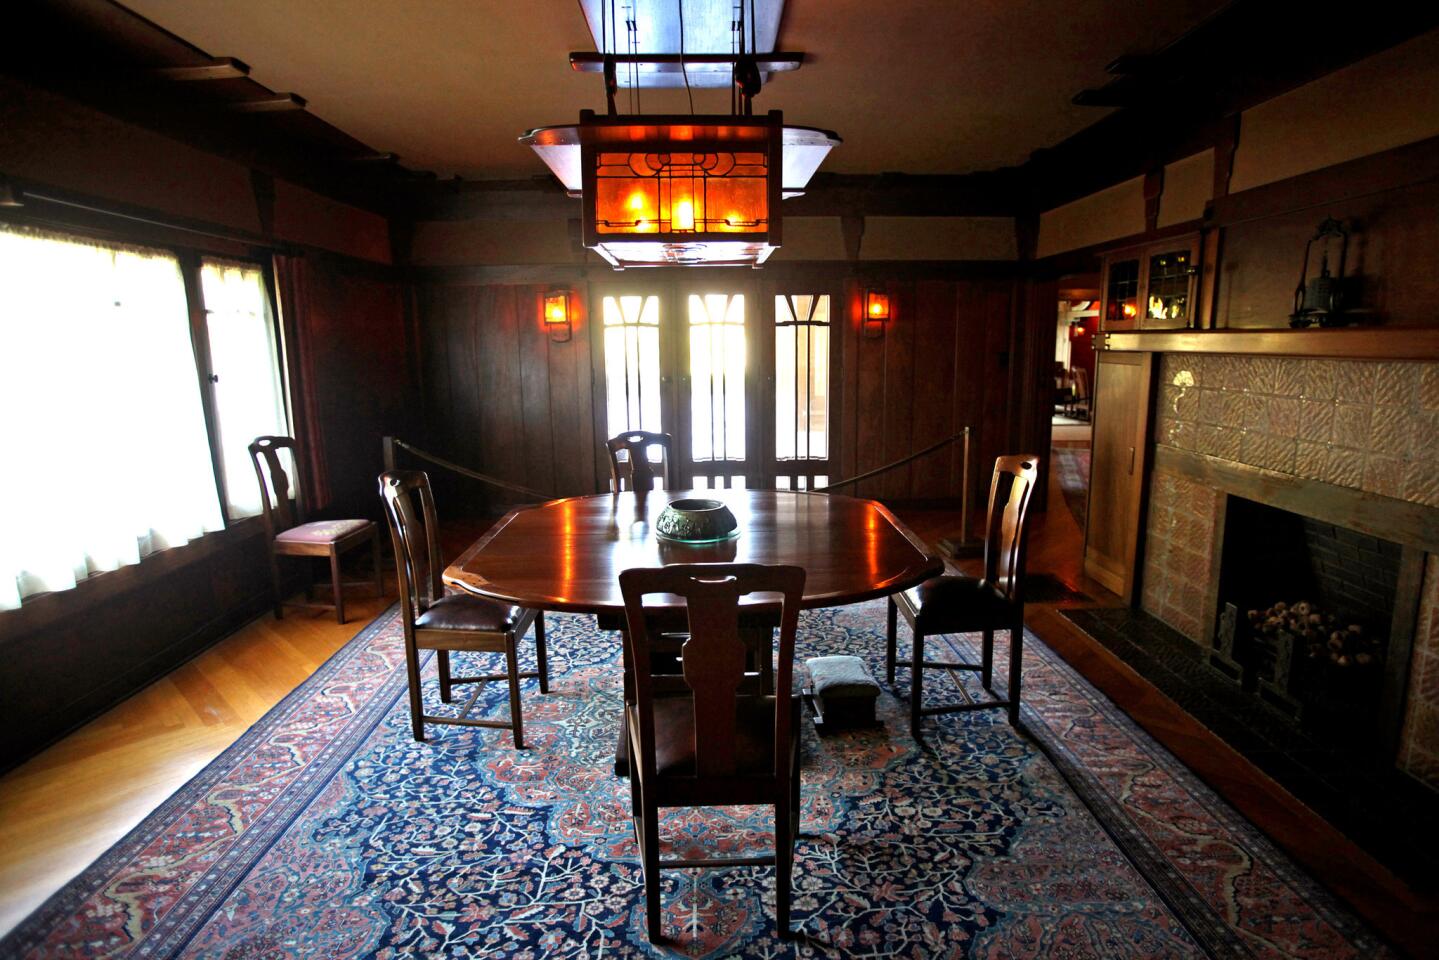 The dining room features an art glass light fixture and built-in cupboards.